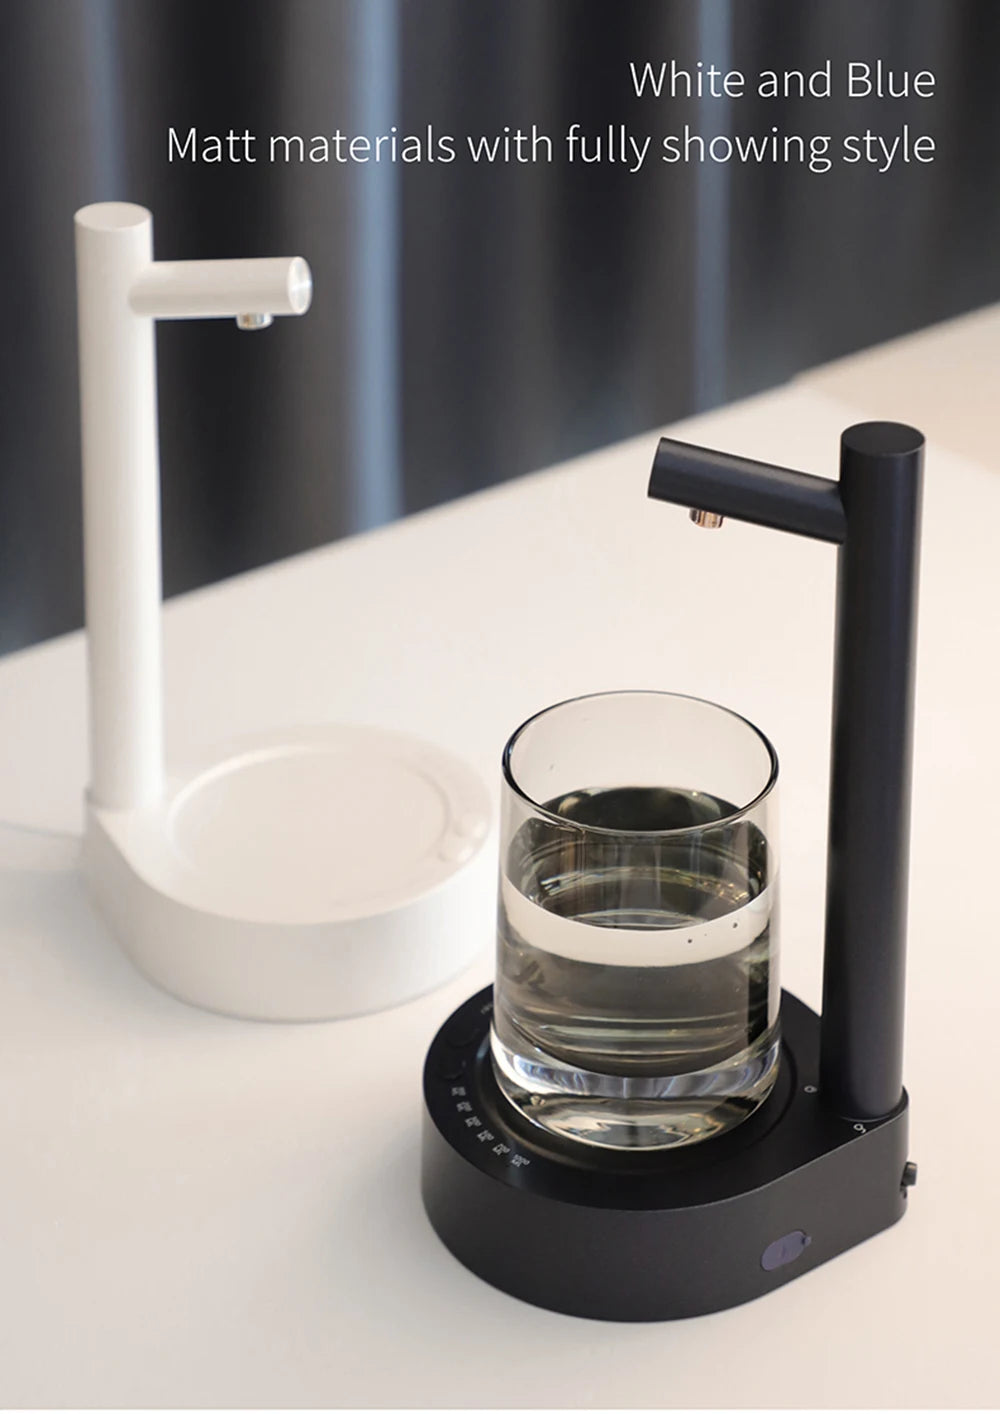 Nightstand automatic water Dispenser